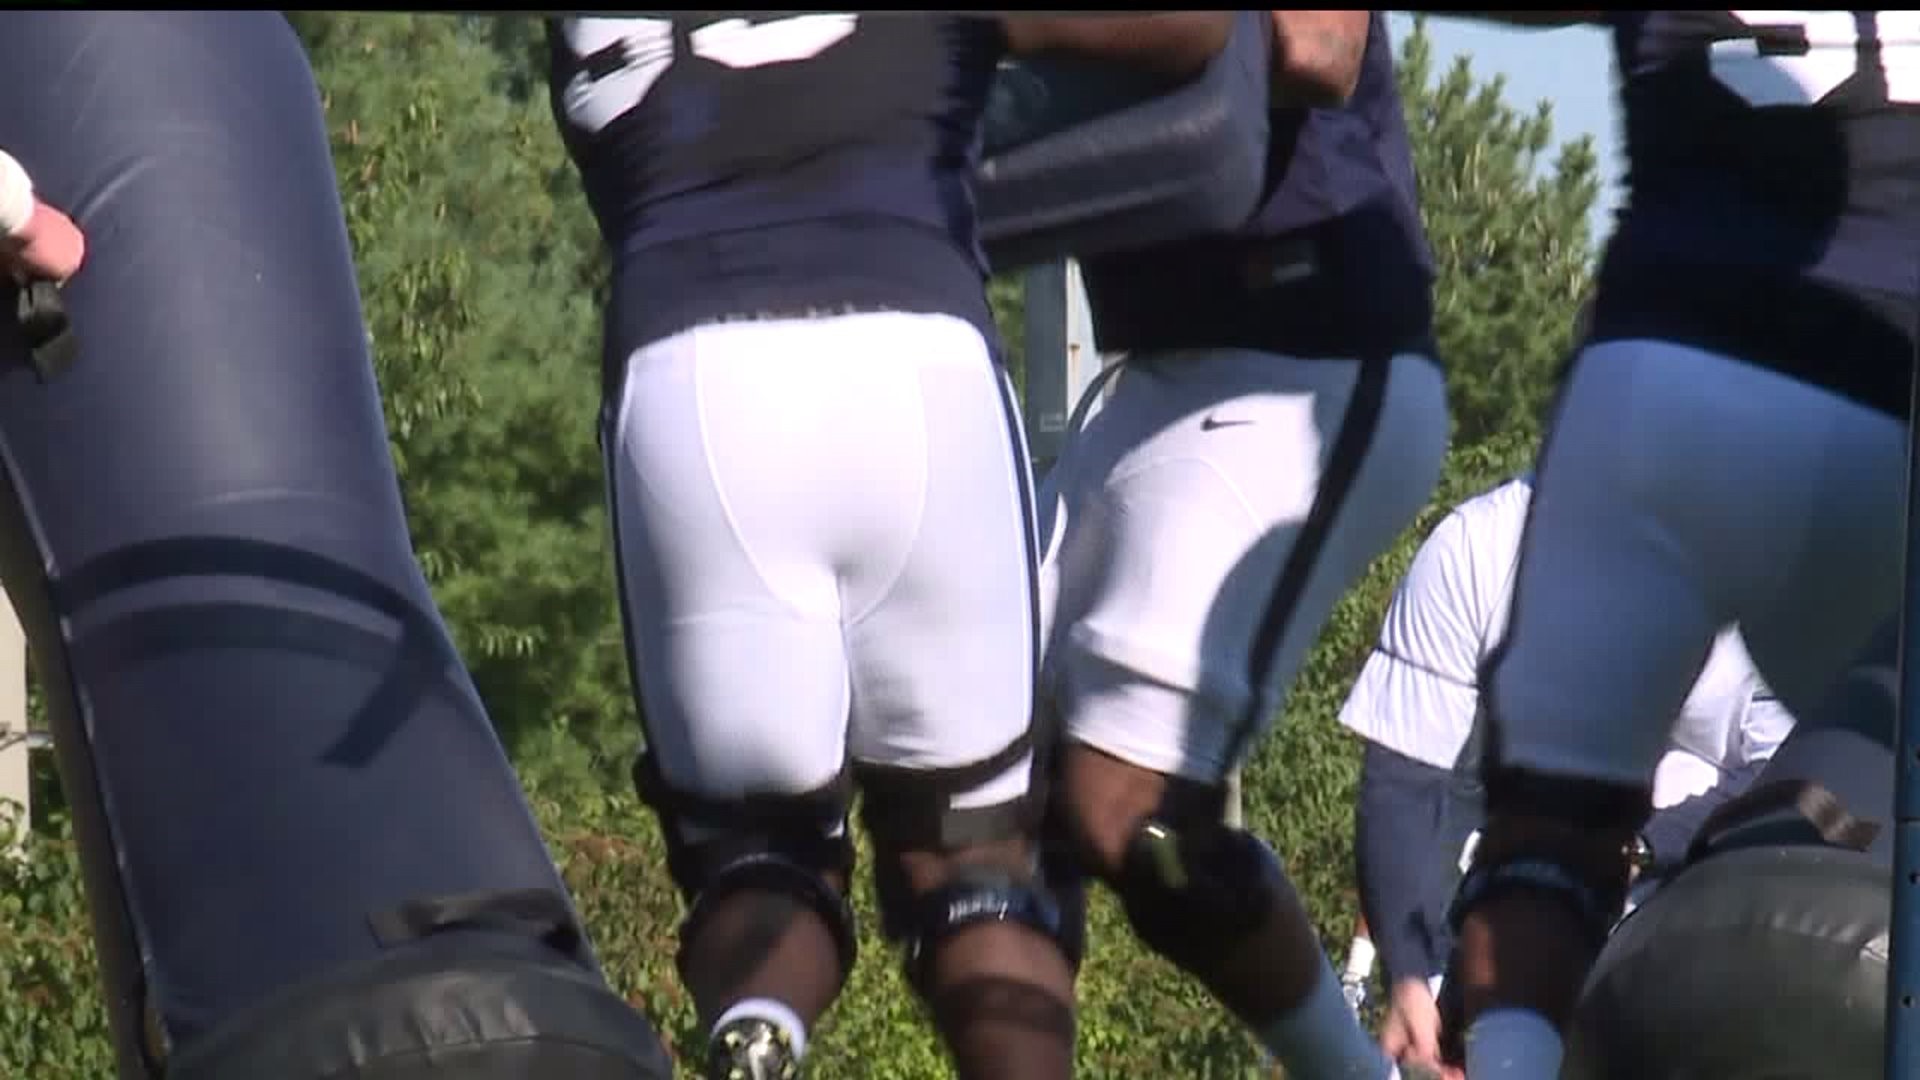 Penn State first practice